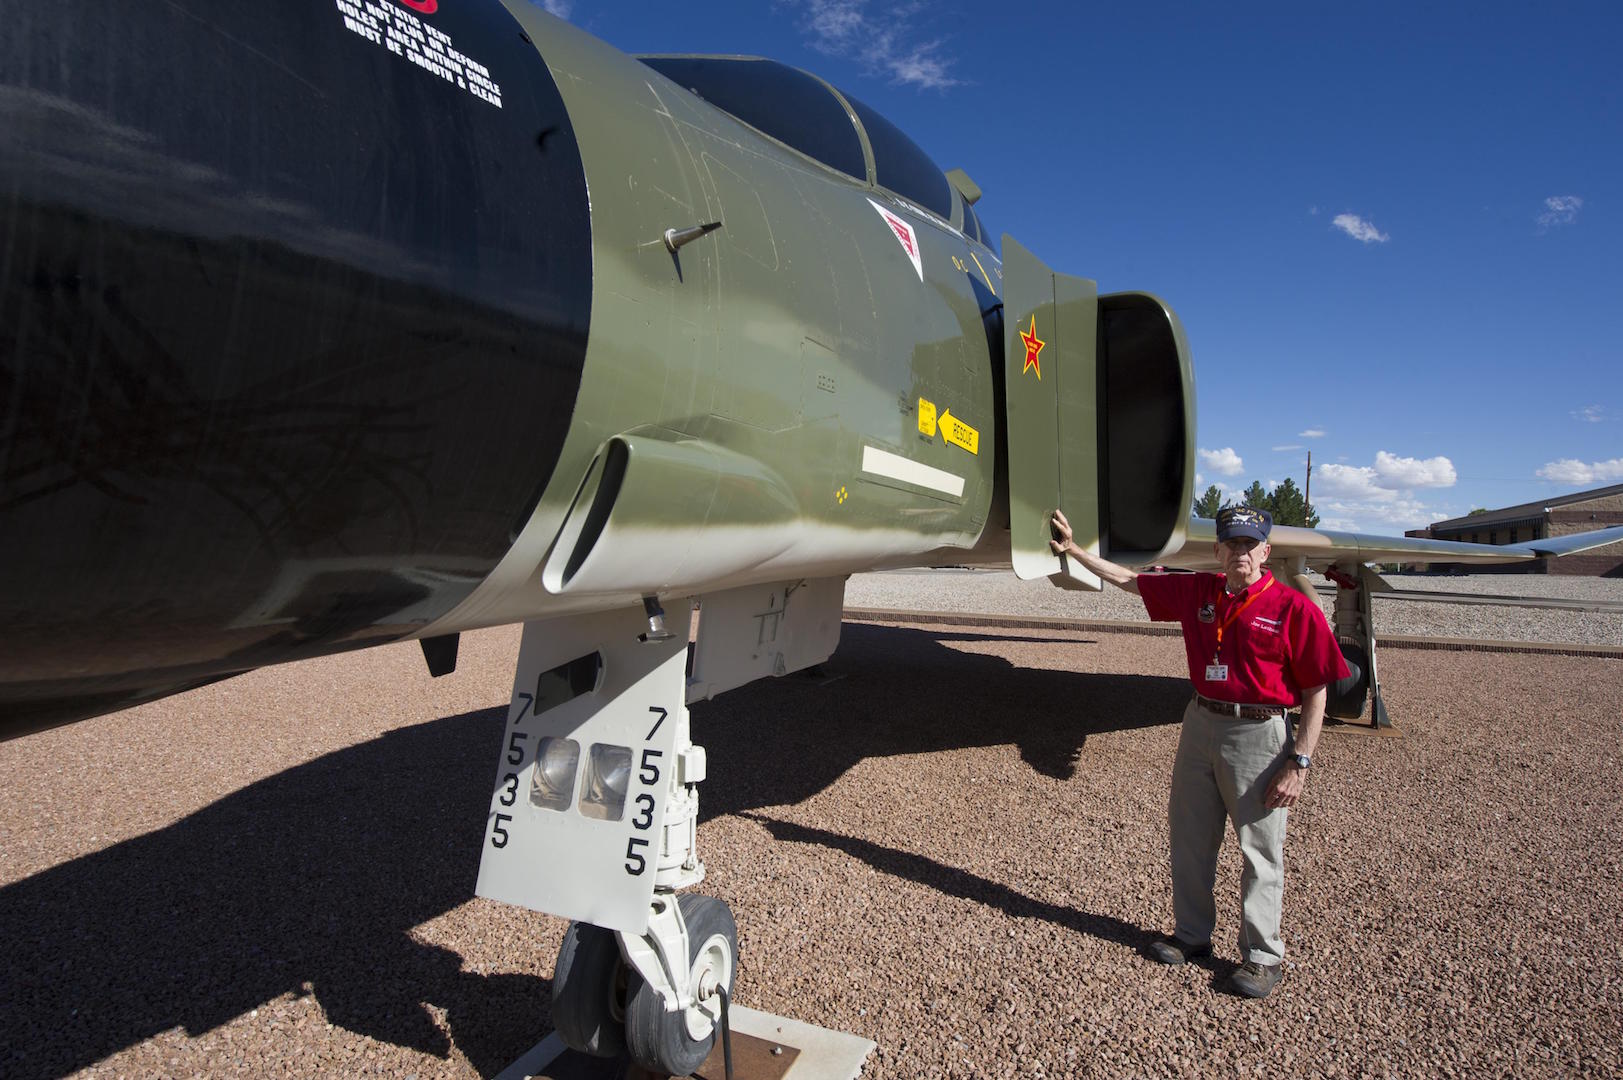 Col. (Ret.) Joe Latham, previously an F-4 Phantom pilot from Holloman Air Force Base, N.M., stops Sept. 13, 2016, to reminisce next to the F-4 adorned with his name Sept. 13, 2016, at Holloman AFB’s Heritage Park. Latham’s visit was part of Holloman’s annual Phantom Society Tour where 160 aircraft enthusiasts, including veterans and non-veterans with aviation backgrounds, visit various base locations. The tour included an F-16 Fighting Falcon briefing and static display, travel to Holloman’s High Speed Test Track, the opportunity to view QF-4s and F-16s in flight, and a visit to Heritage Park to view displays of various aircraft historically stationed at Holloman AFB. (U.S. Air Force photo by Master Sgt. Matthew McGovern)